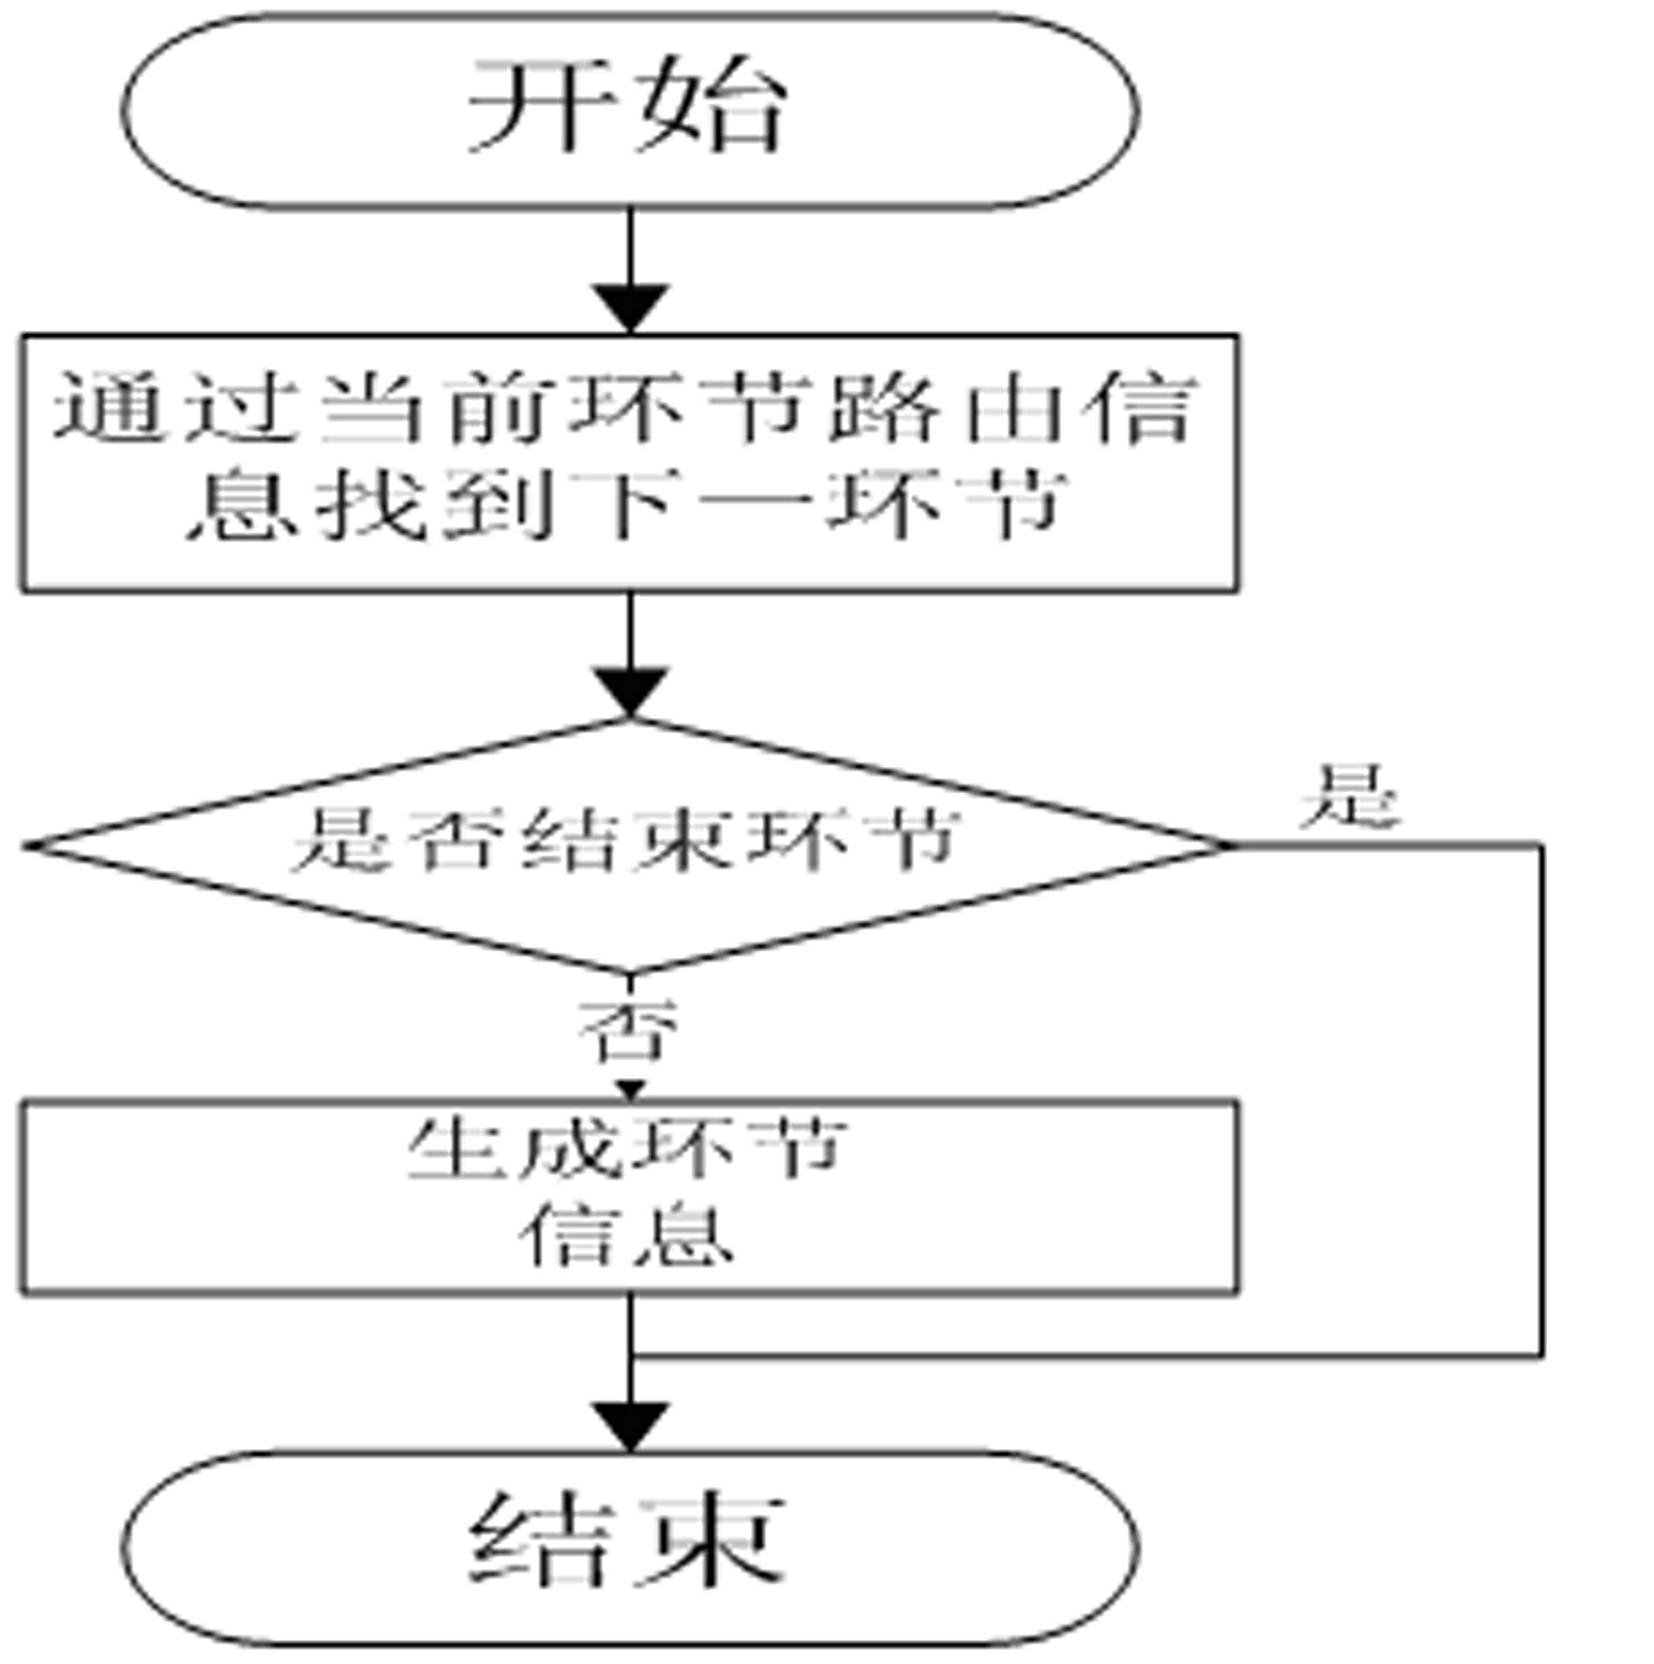 Implementation method and system of flow engine based on dynamic business